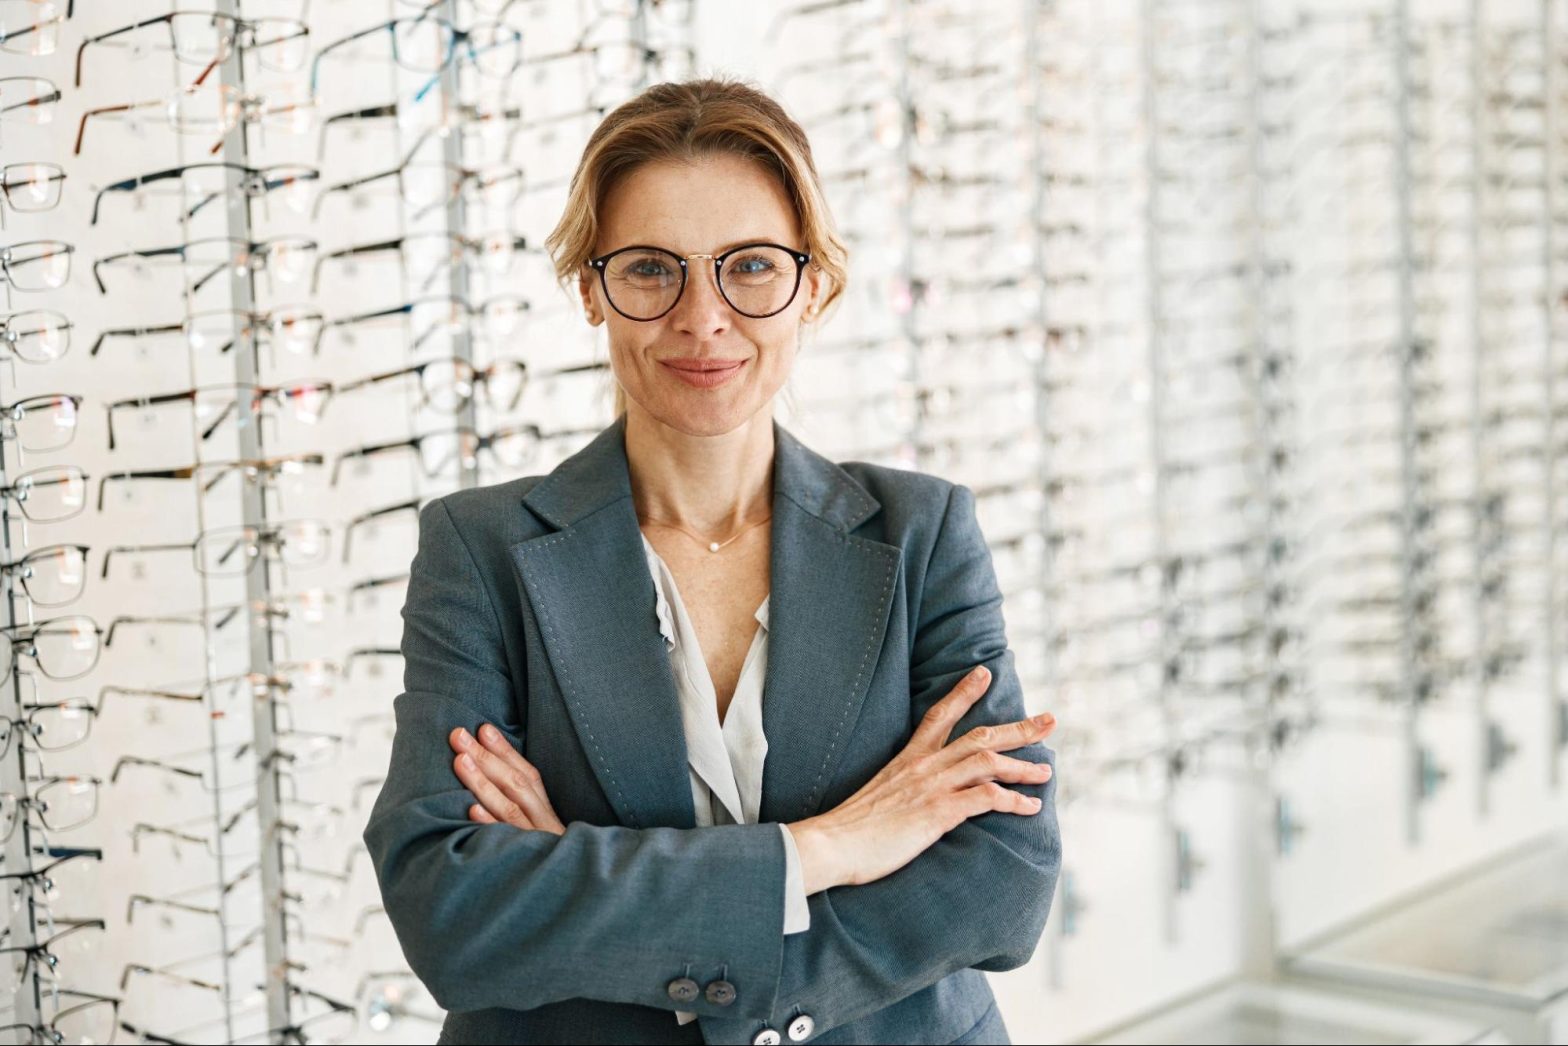 Proud, smiling optometrist standing in front of wall of eyeglasses